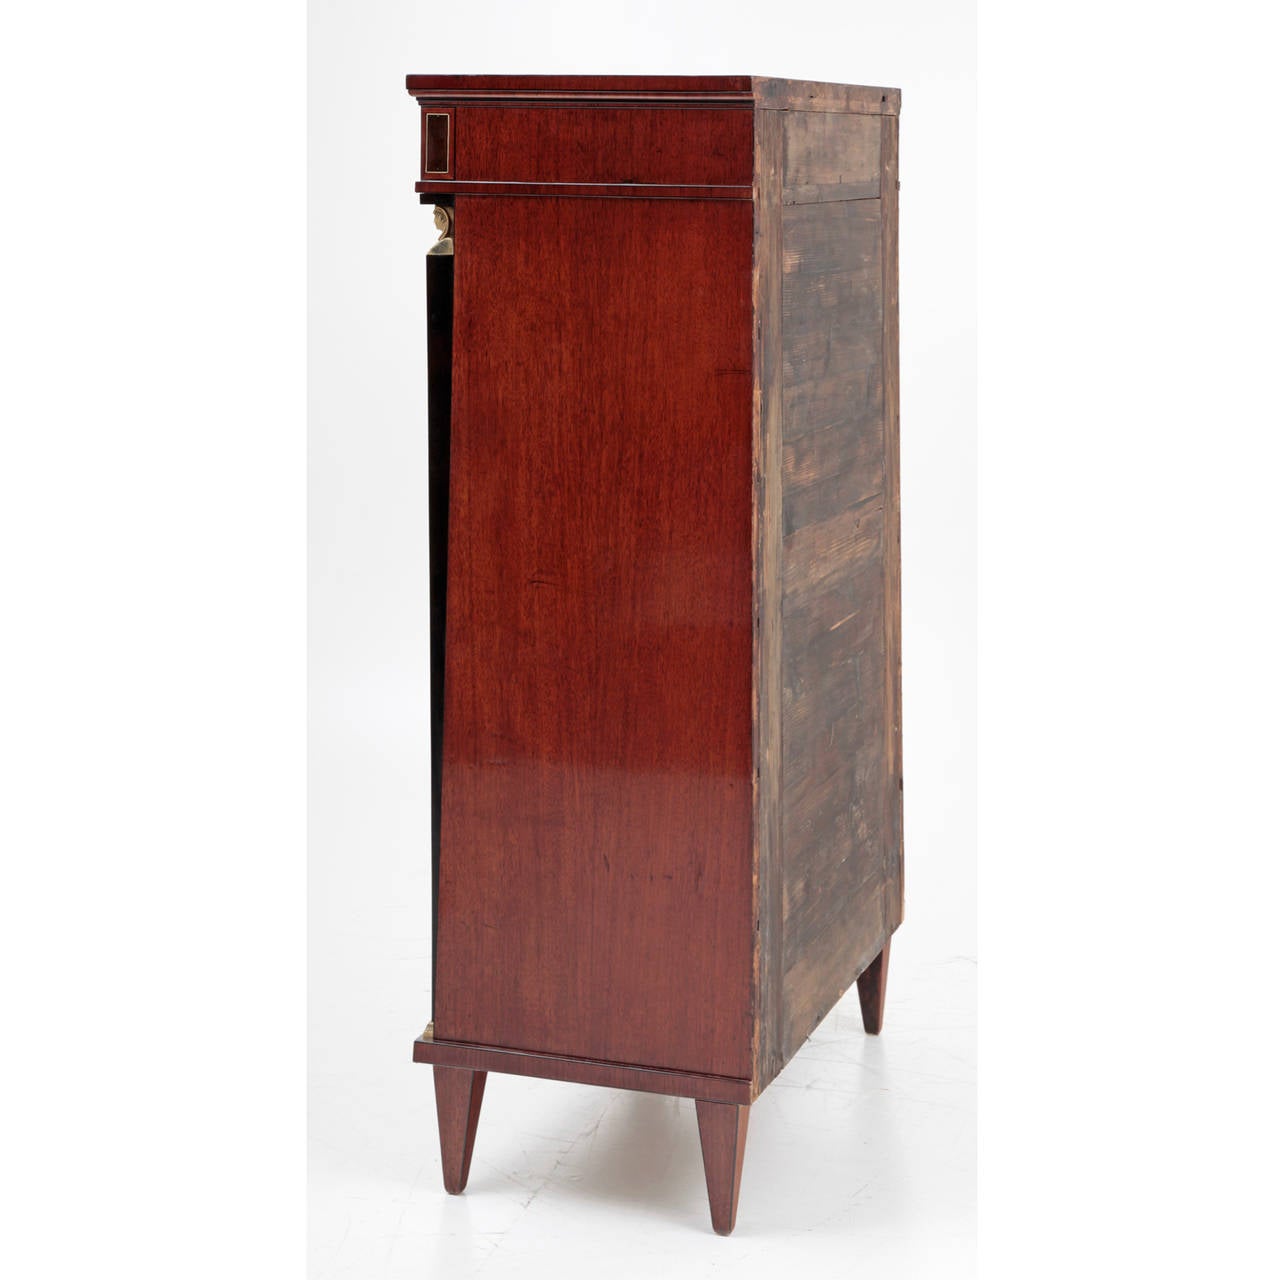 Wood Vienna Empire Chest of Drawers or Semainaire from the 1810s